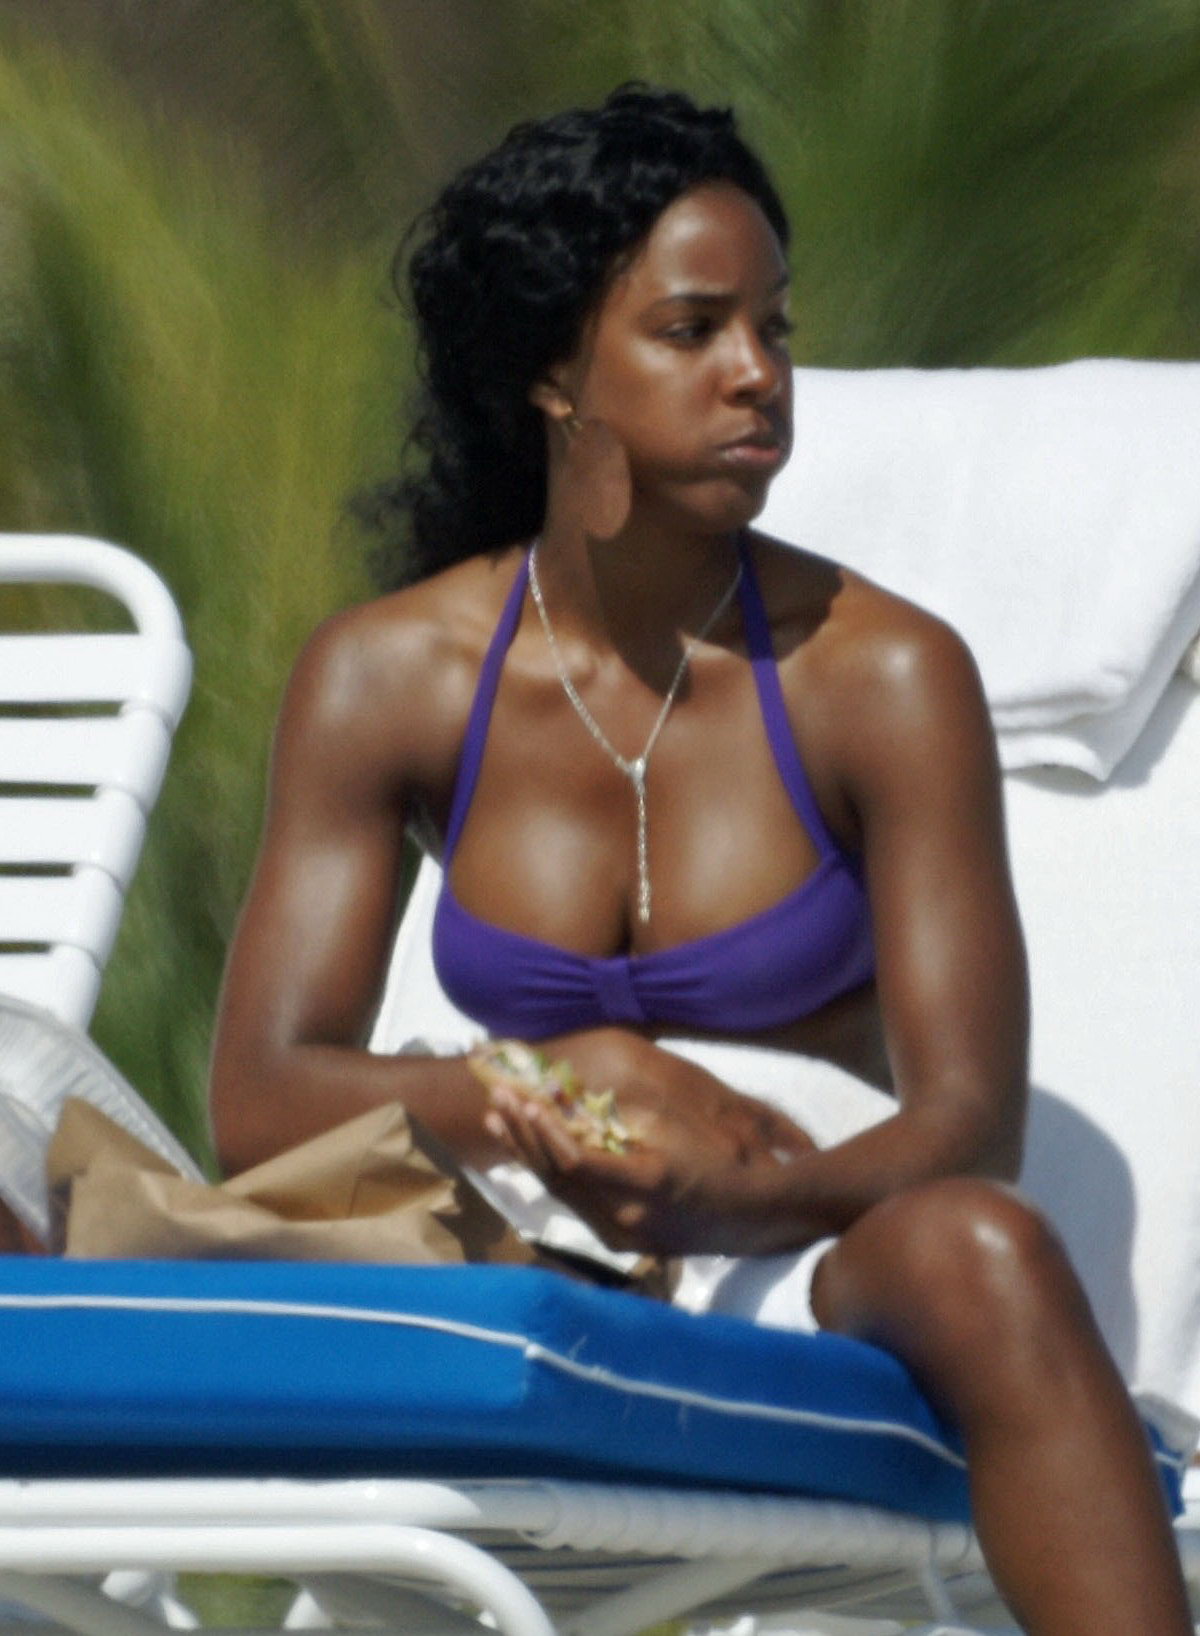 Kelly rowland topless